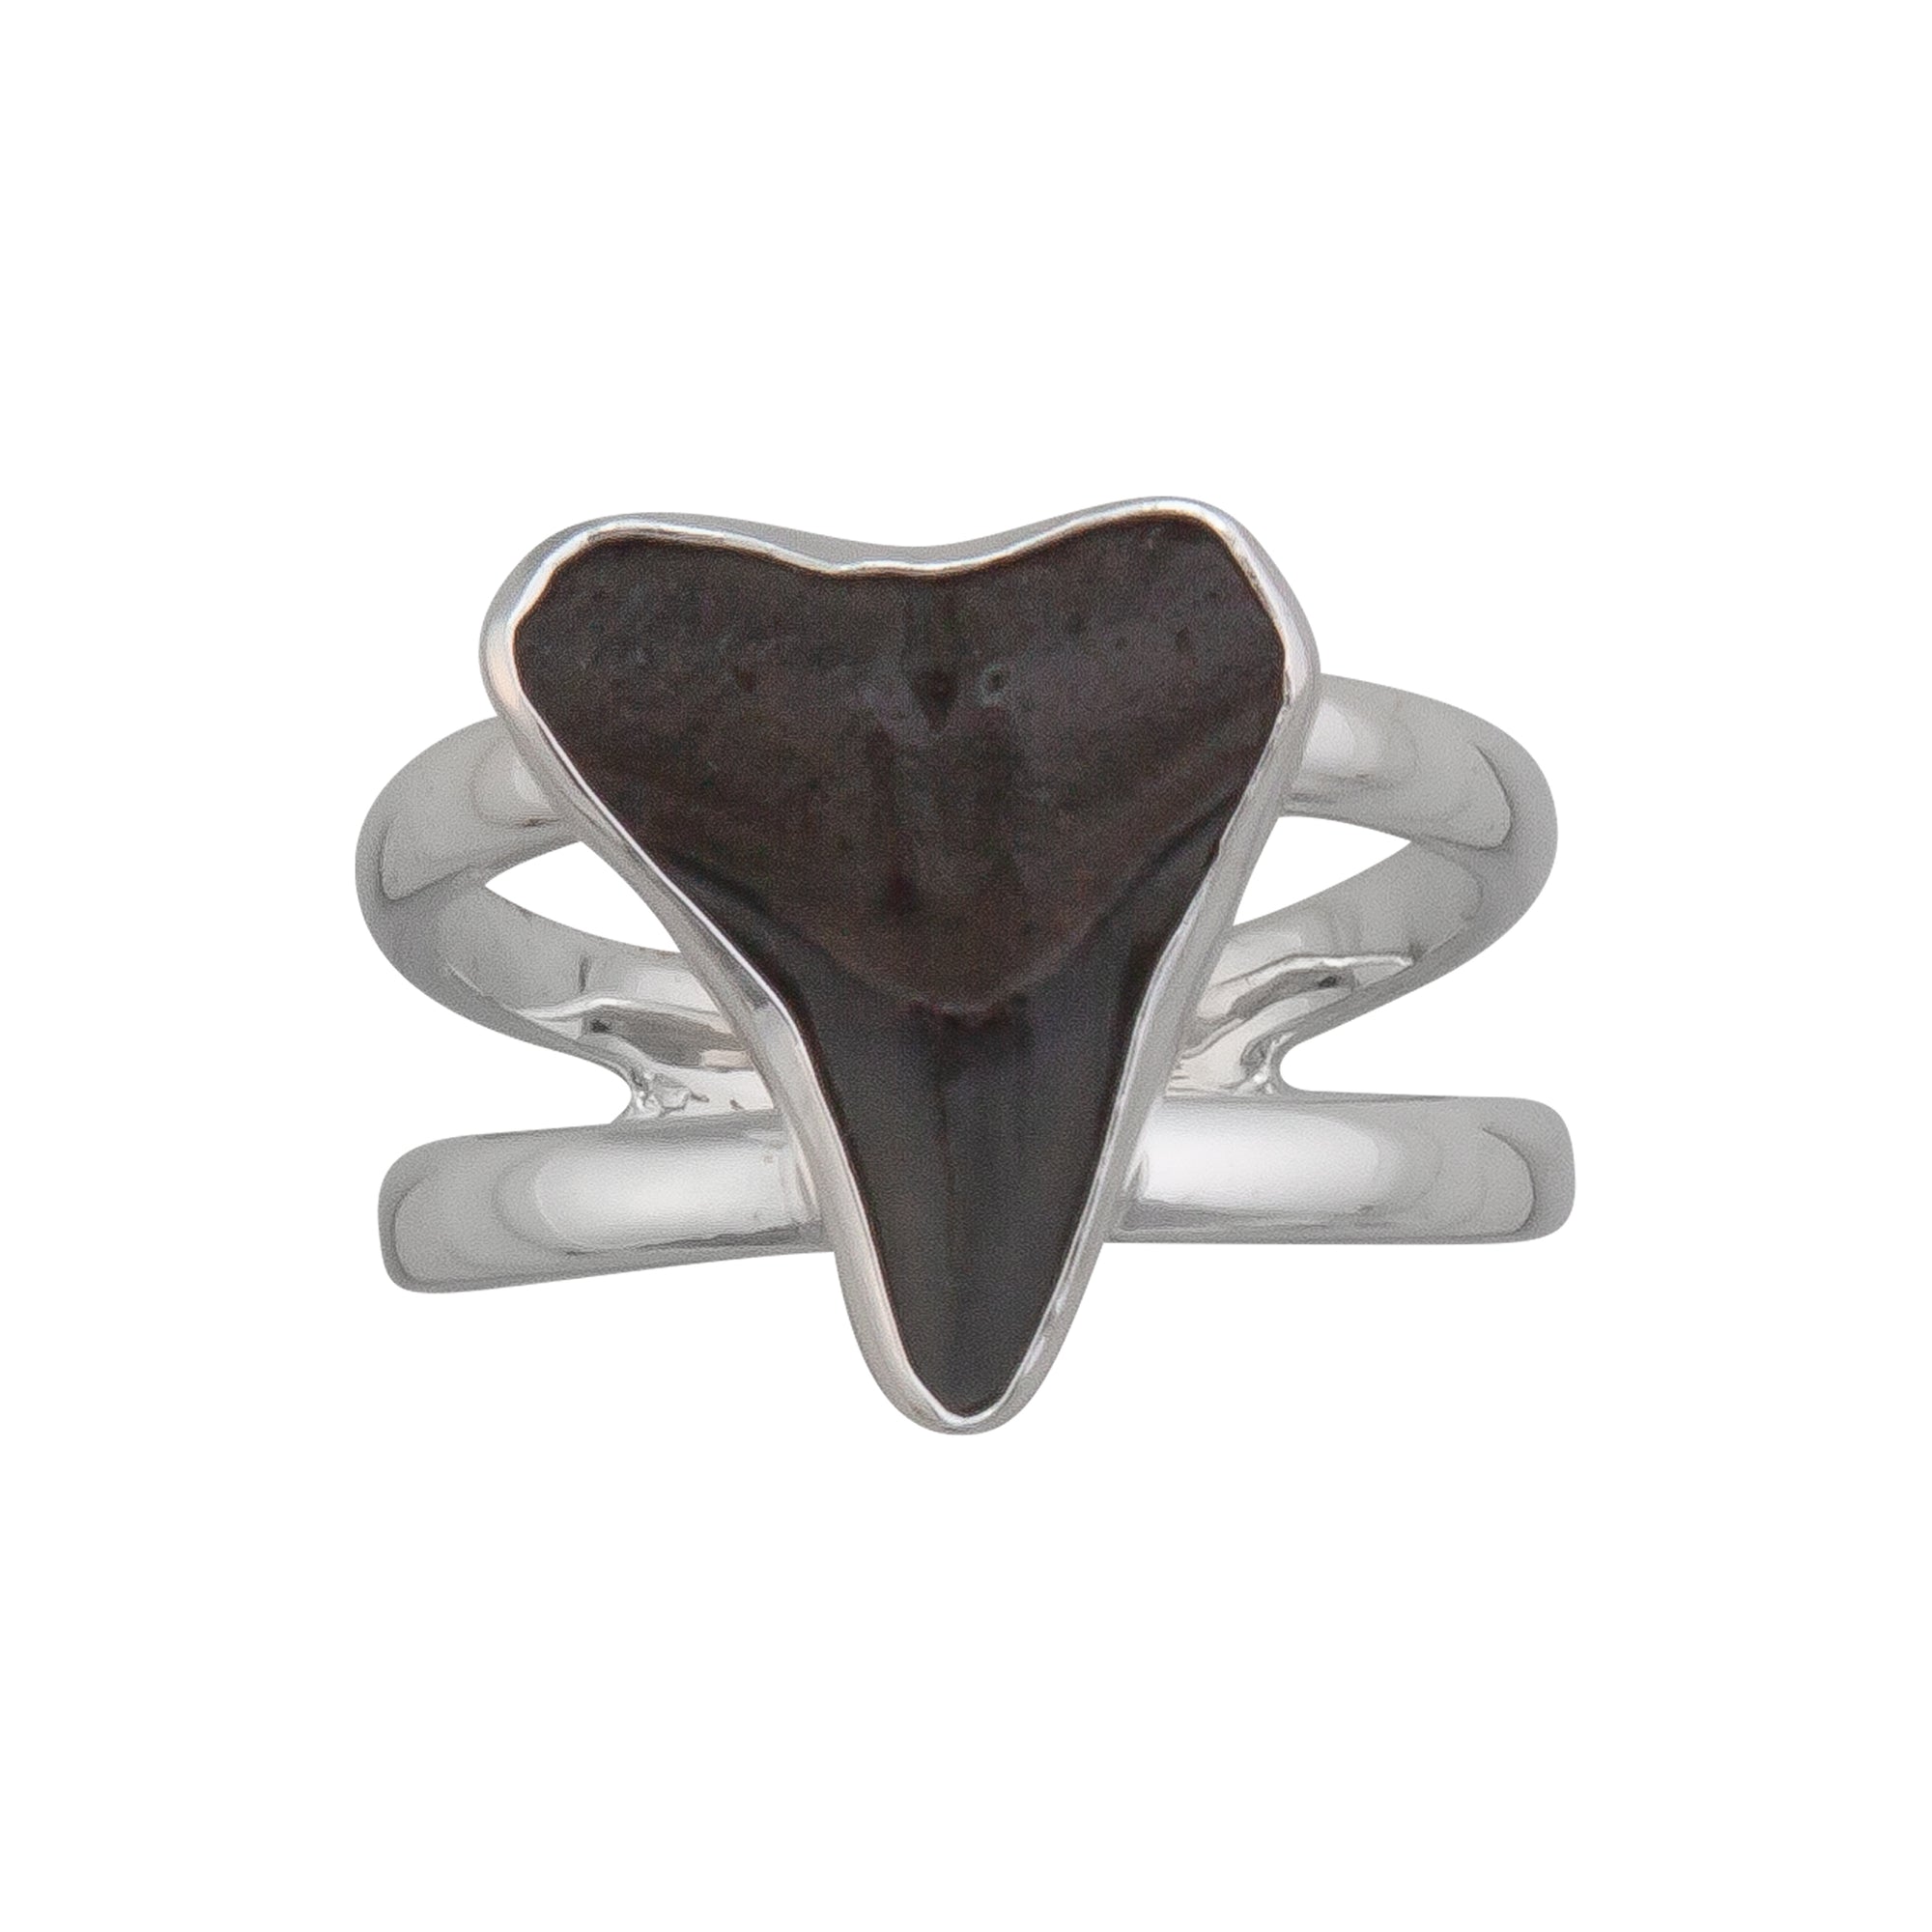 Sterling Silver Shark Tooth Cuff Adjustable Ring | Charles Albert Jewelry